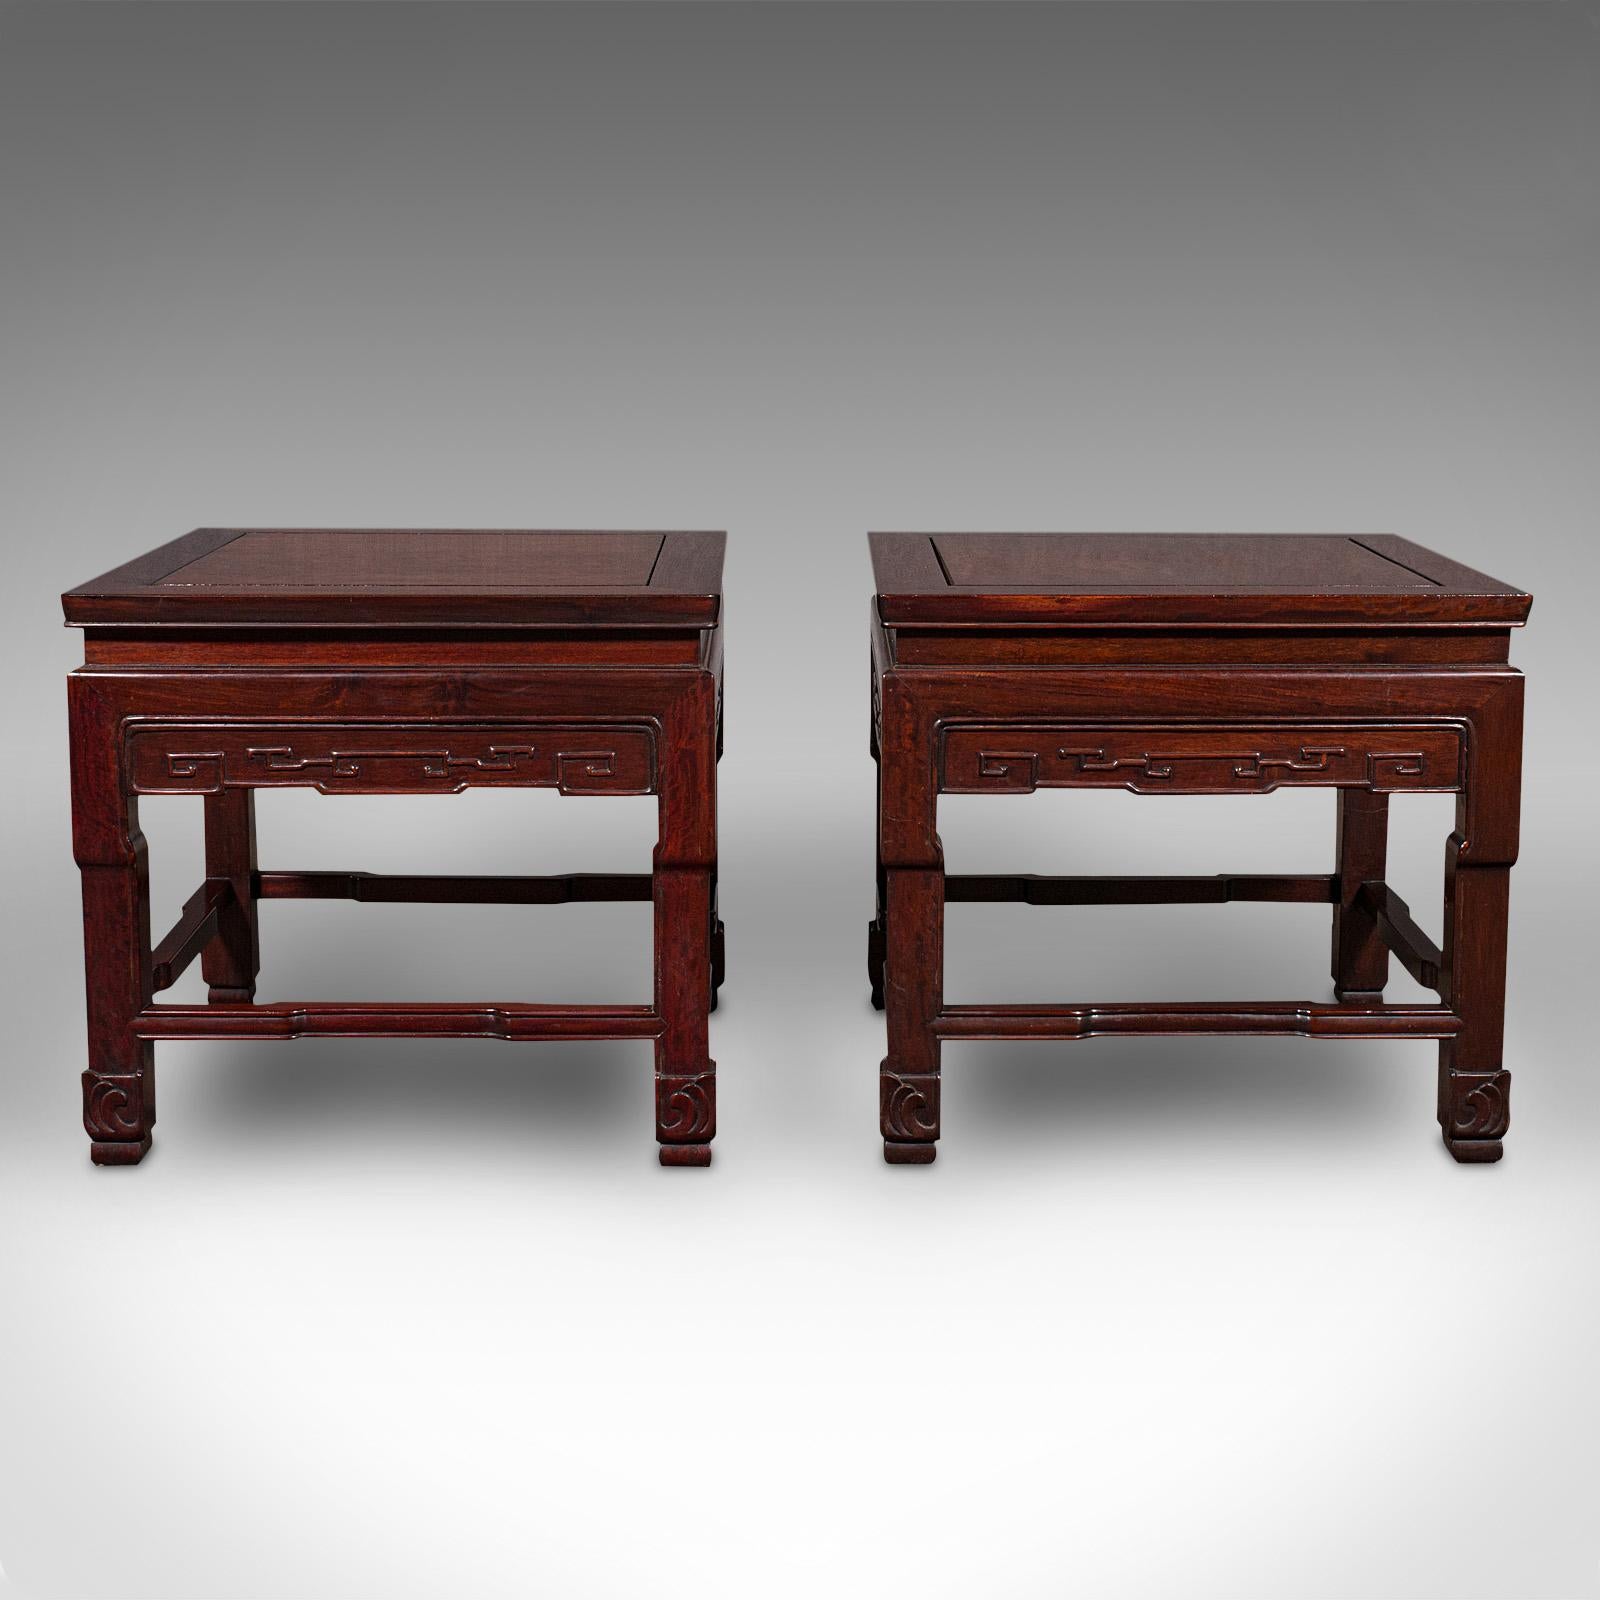 This is a pair of vintage bedside tables. An Oriental, mahogany small side, or coffee table, dating to the late Art Deco period, circa 1940.

Delightful Oriental taste and superb colour to this versatile pair of tables
Displaying a desirable aged